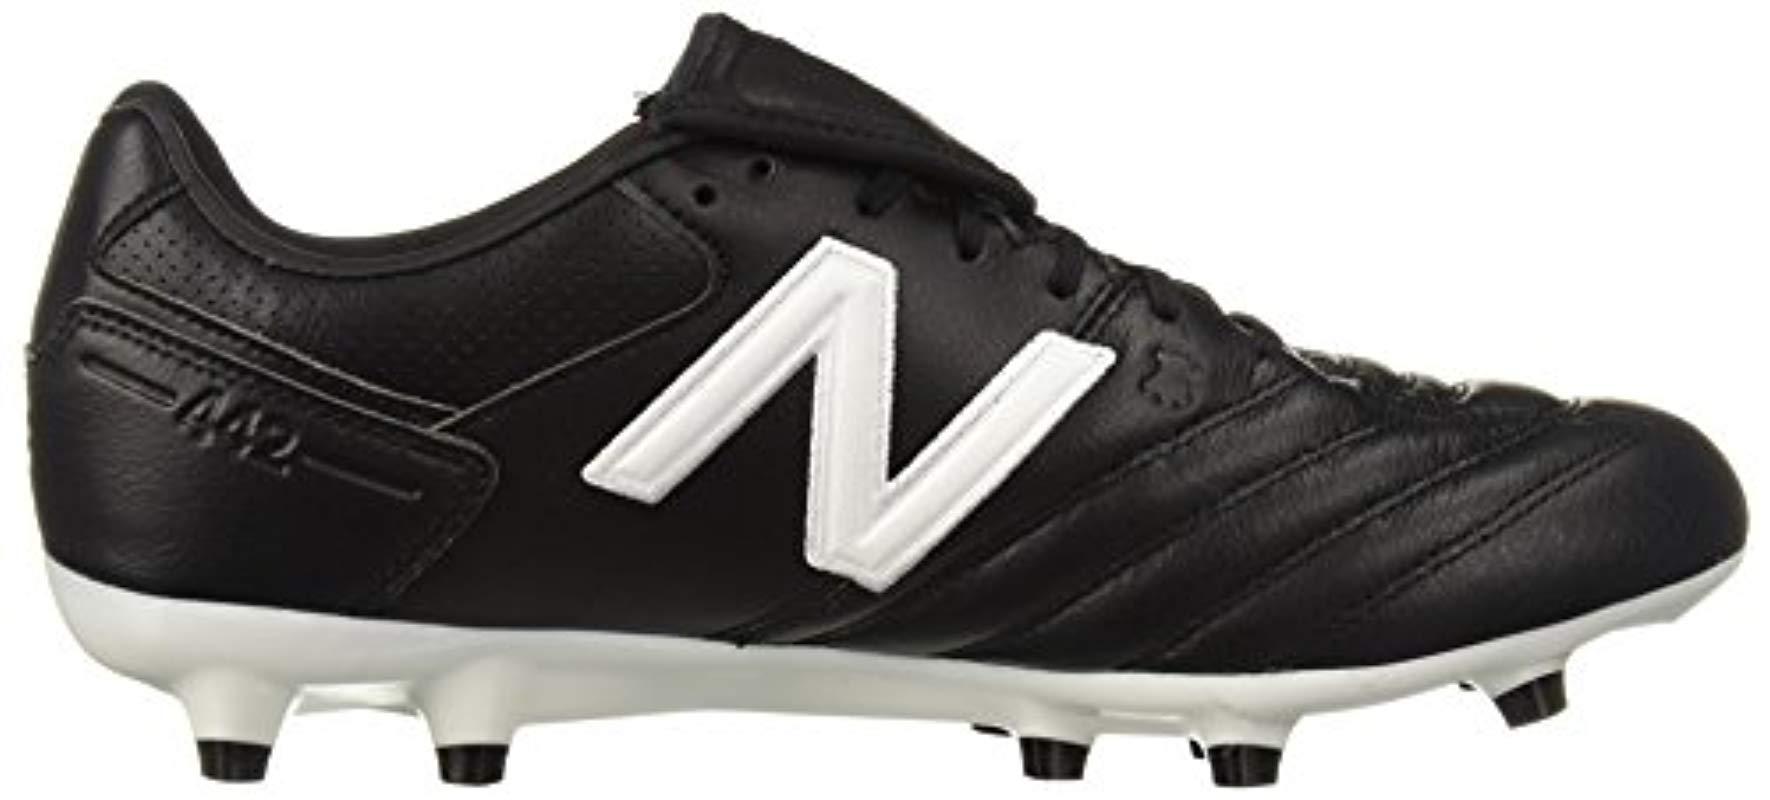 New Balance Synthetic 442 Pro Fg Fboot In Black White Black For